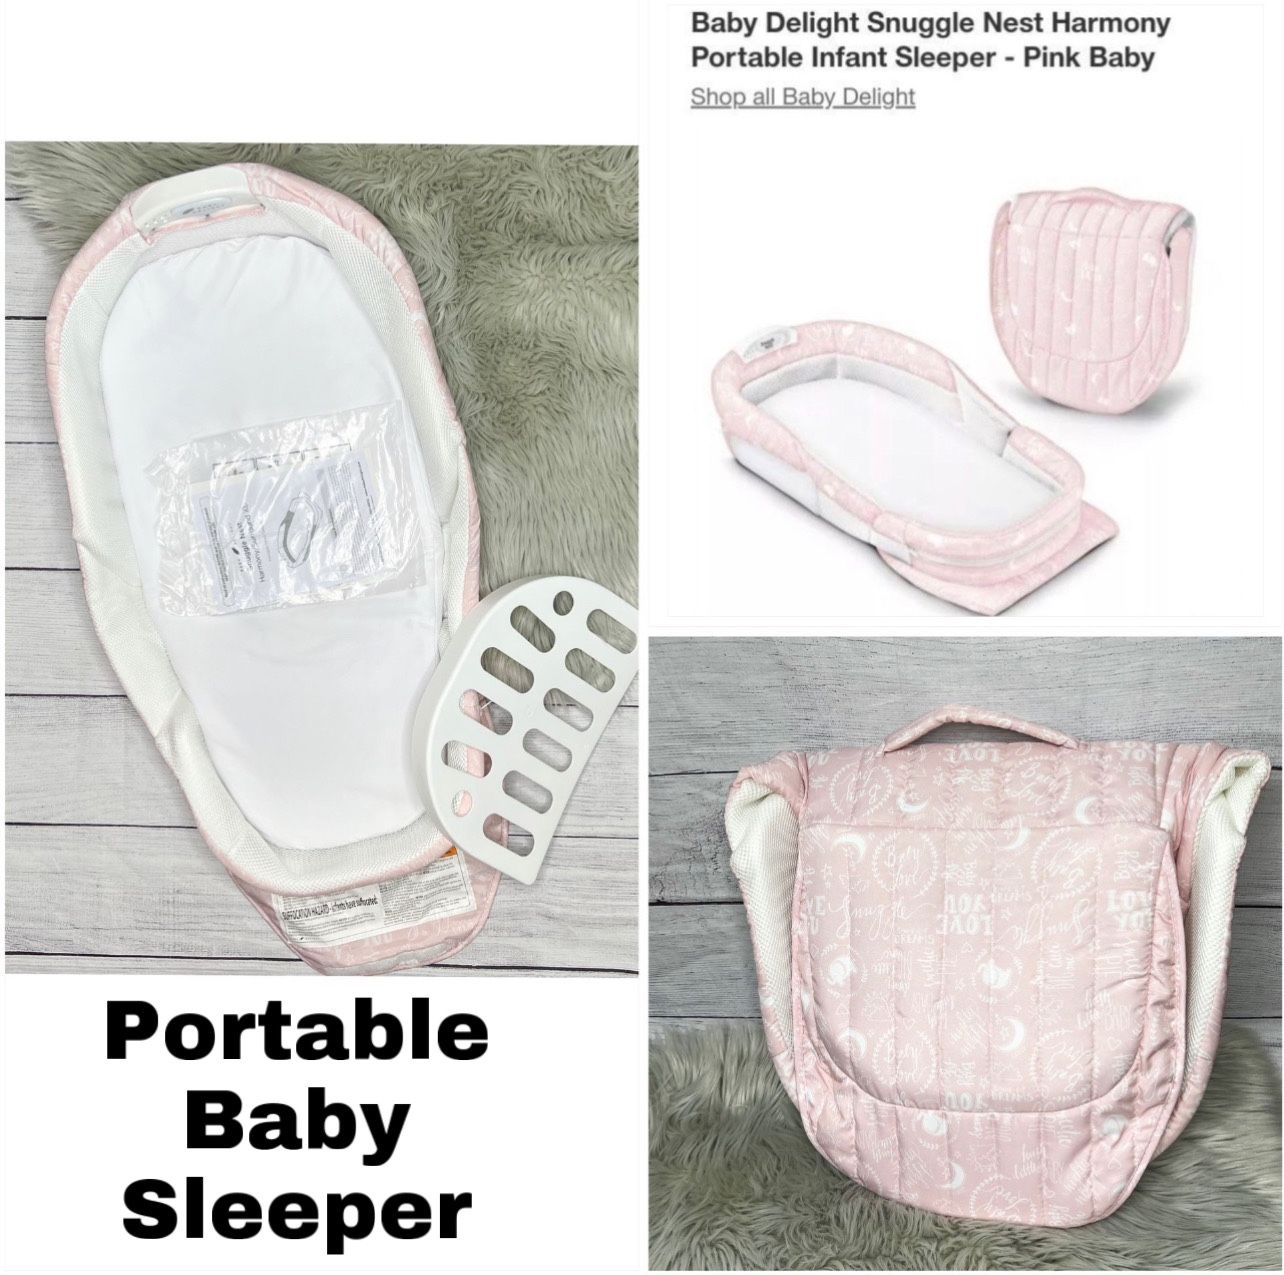 Baby Delight Snuggle Nest Portable Sleeper with Removable Incline Wedge, Pink